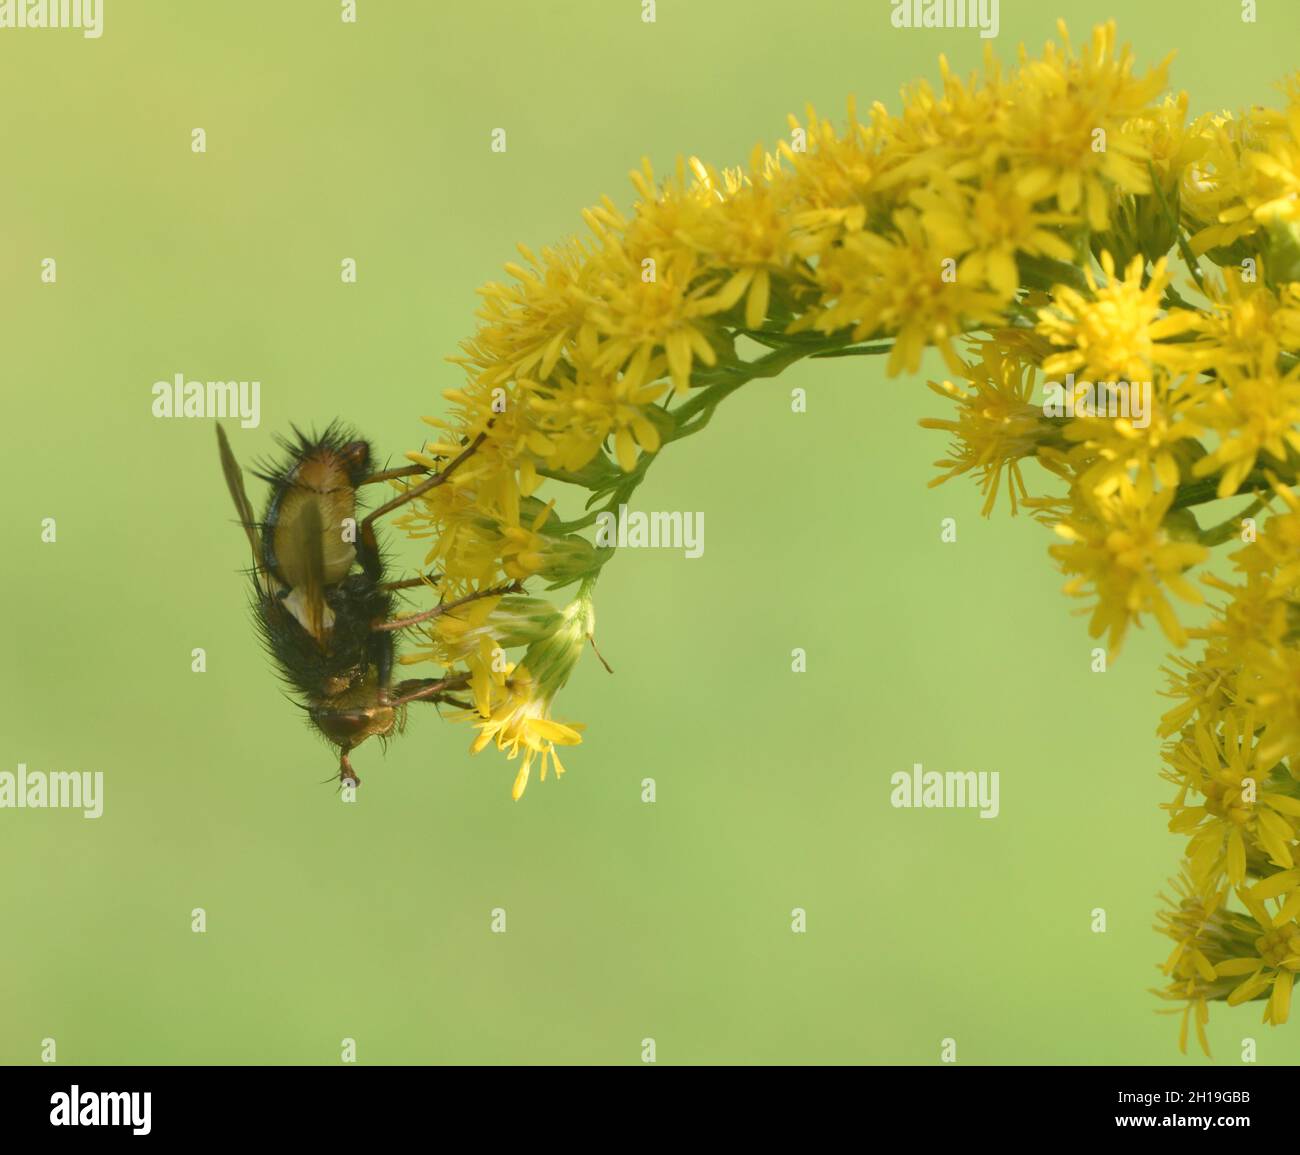 A fly feeds on a golden rod or solidago flower head. Bedgebury Forest, Kent, UK. Stock Photo